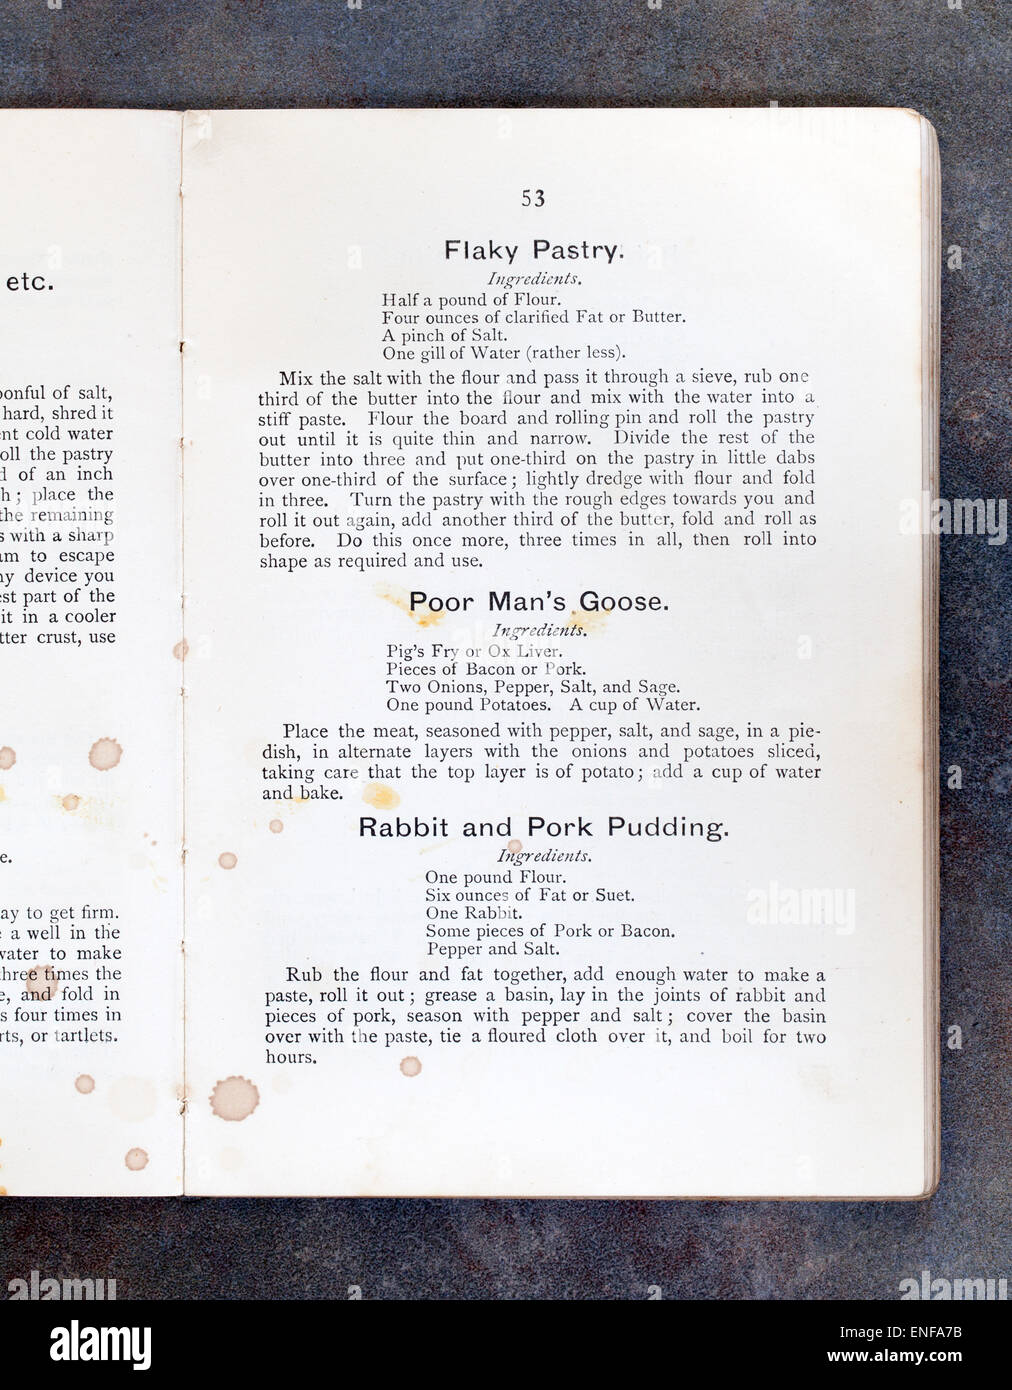 Poor Mans Goose Recipes from Plain Cookery Recipes Book by Mrs Charles Clarke for the National Training School for Cookery Stock Photo